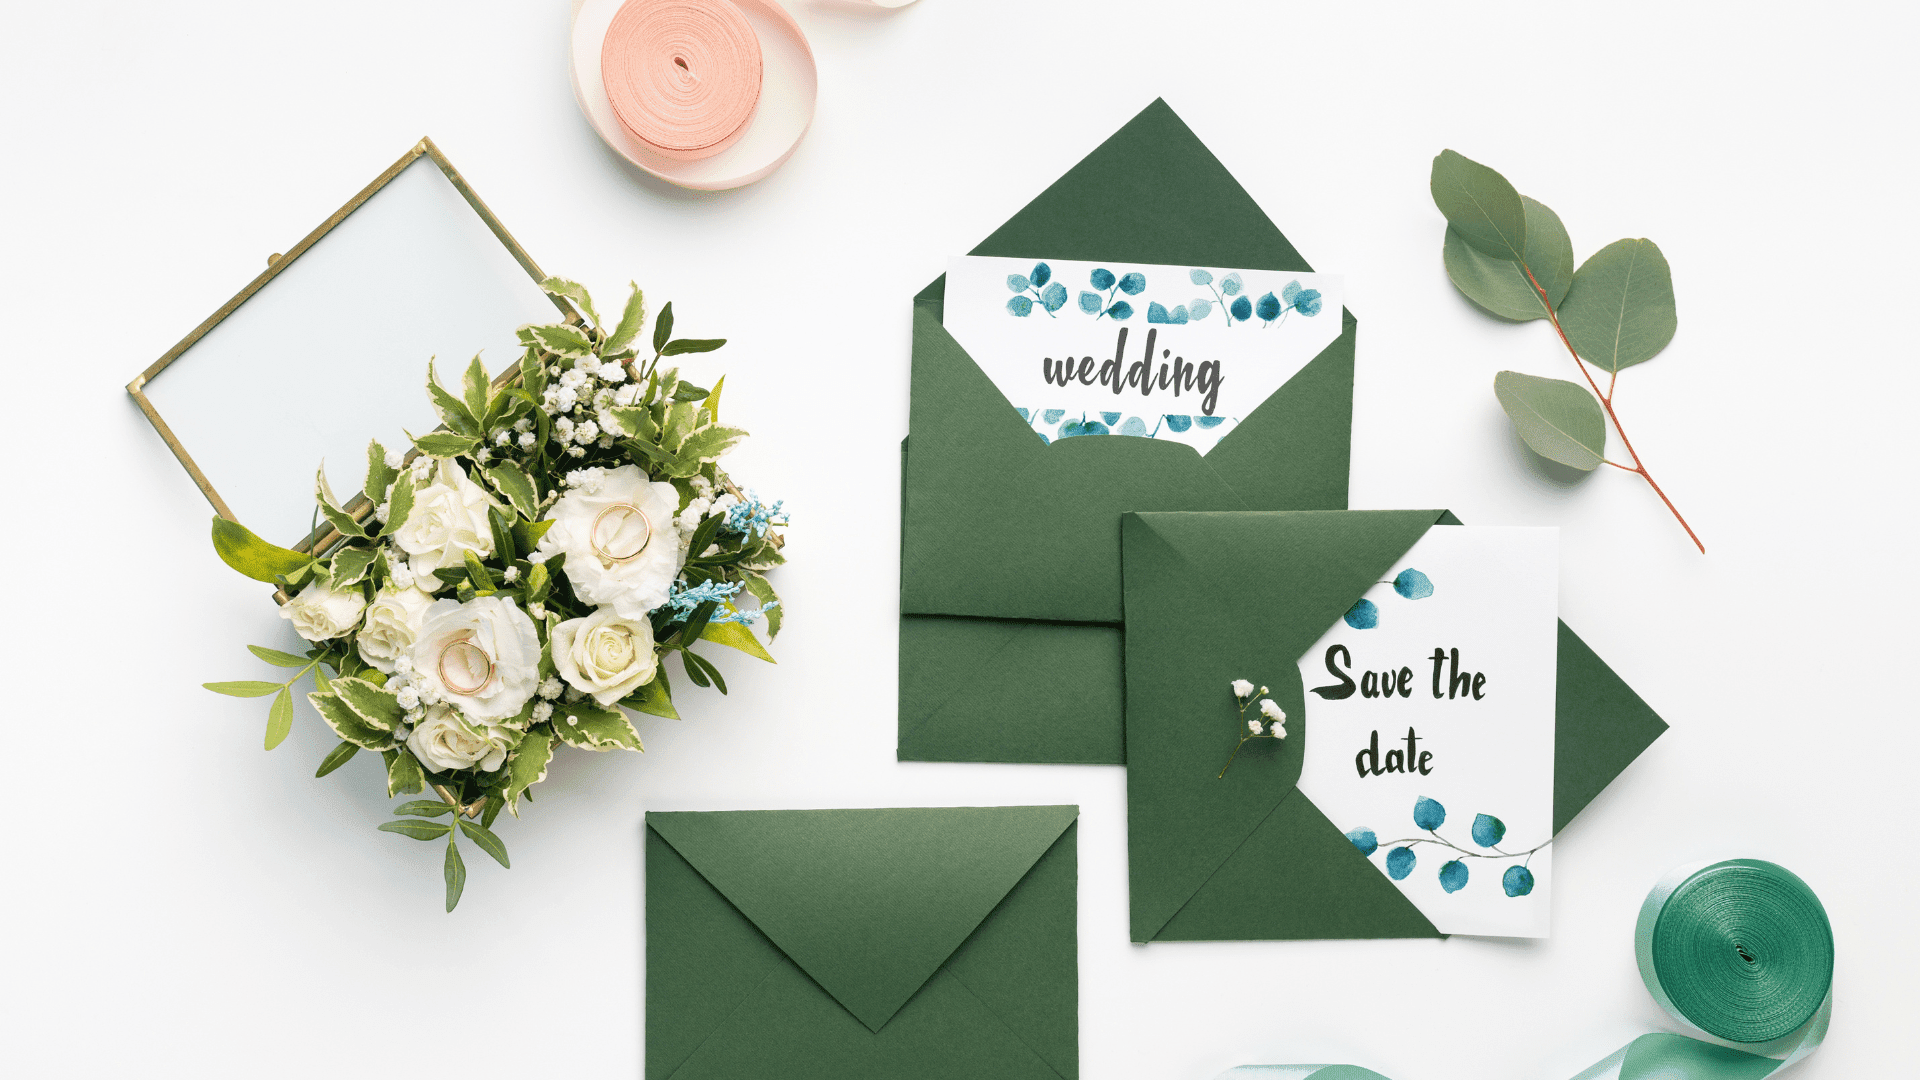 Tips to Pick the Right Colors for Your Wedding Stationery